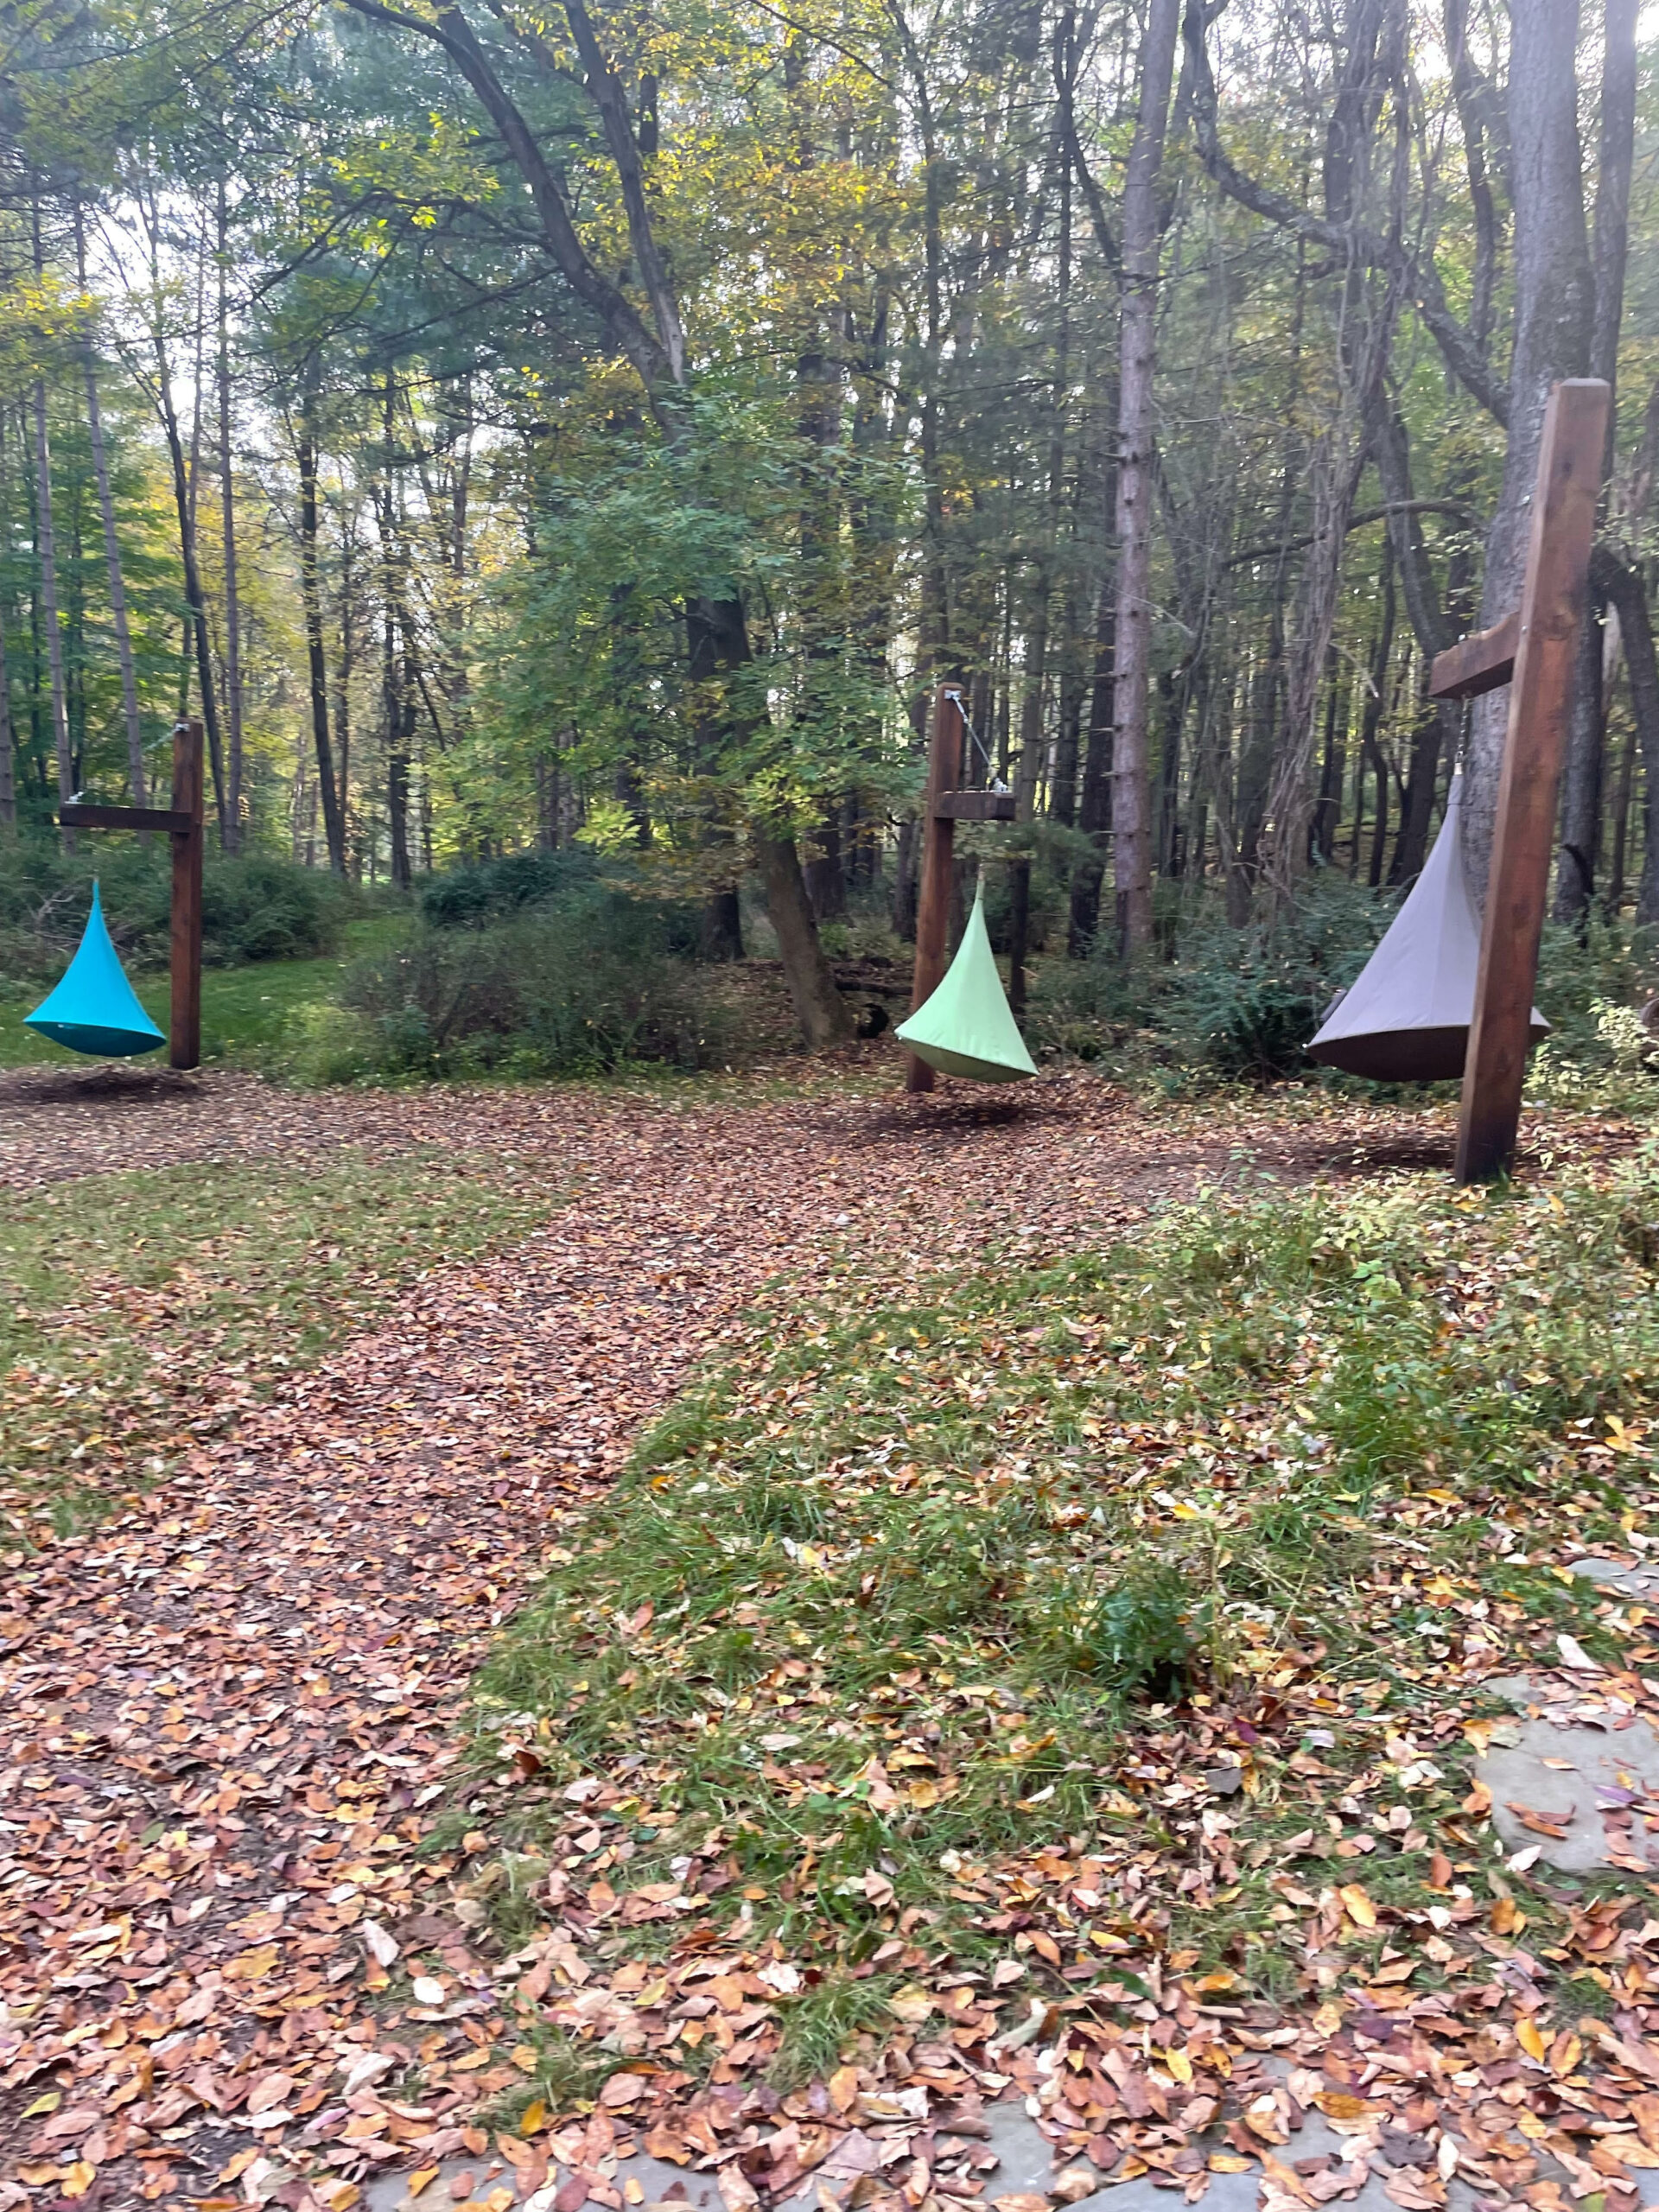 cuddle swings hanging from wooden posts in a forest